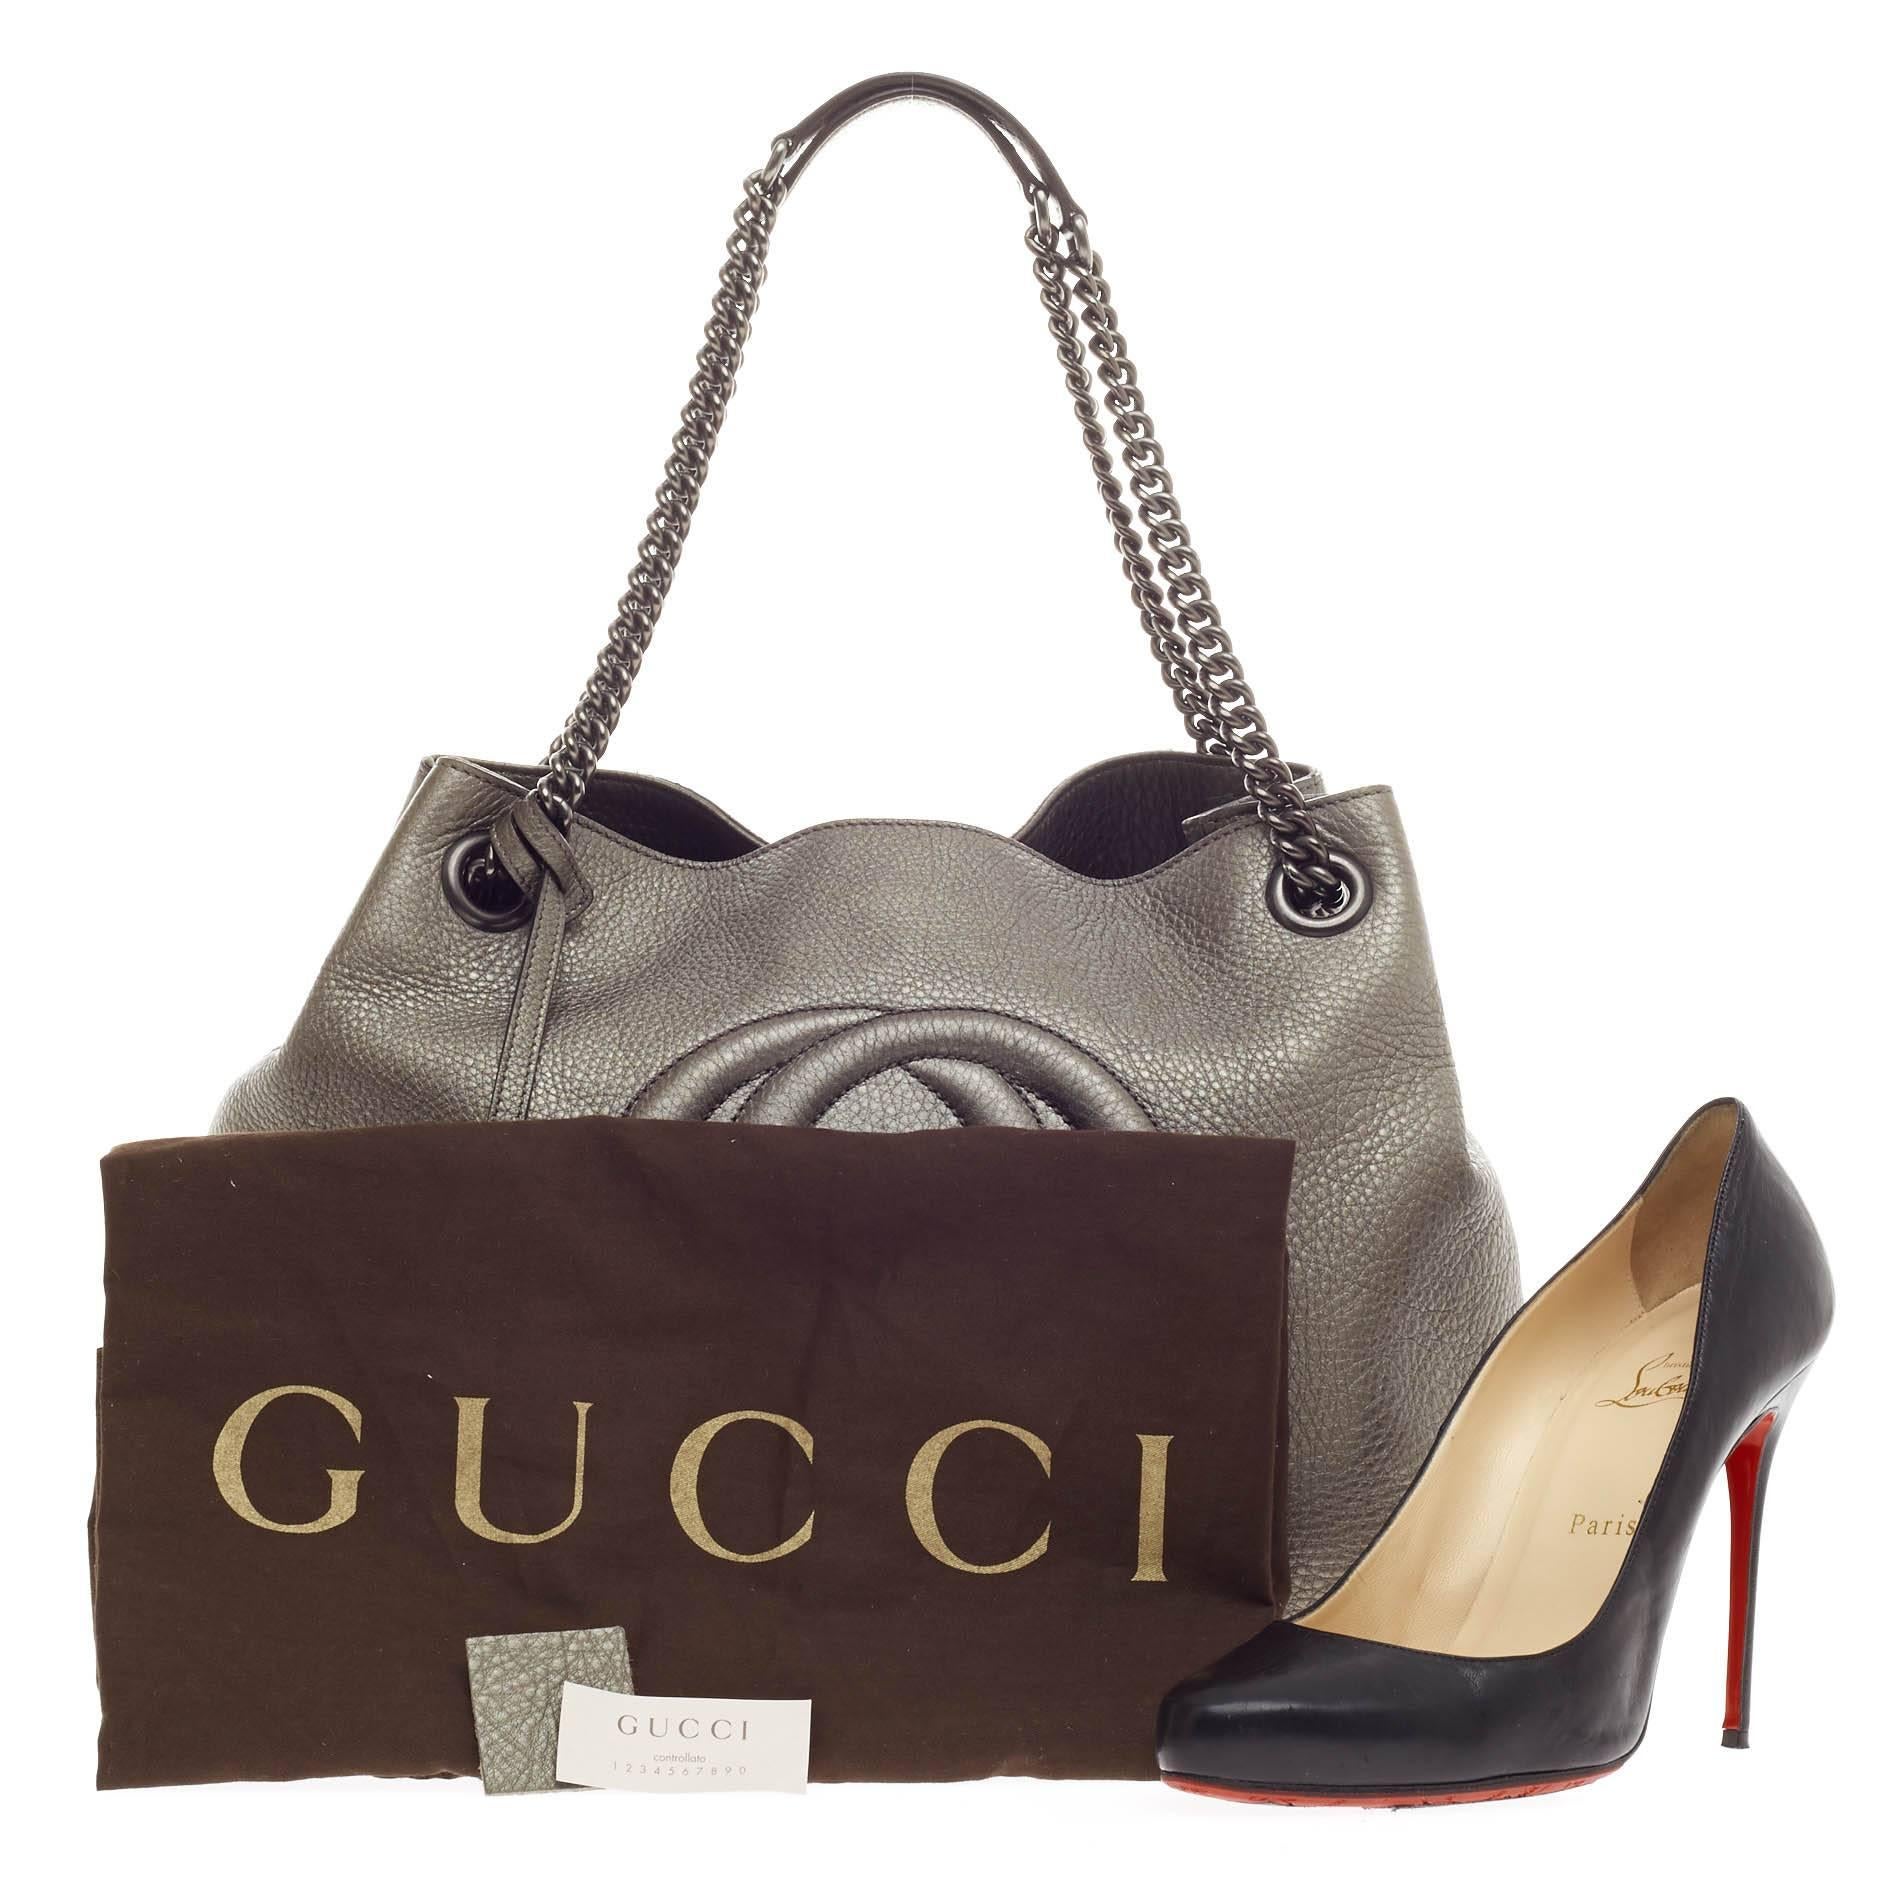 This authentic Gucci Soho Shoulder Bag Chain Strap Leather Medium in metallic pewter is the perfect fashionable tote for on-the-go moments. Crafted in soft pebbled leather, this chic, everyday tote features an oversized embossed interlocking GG